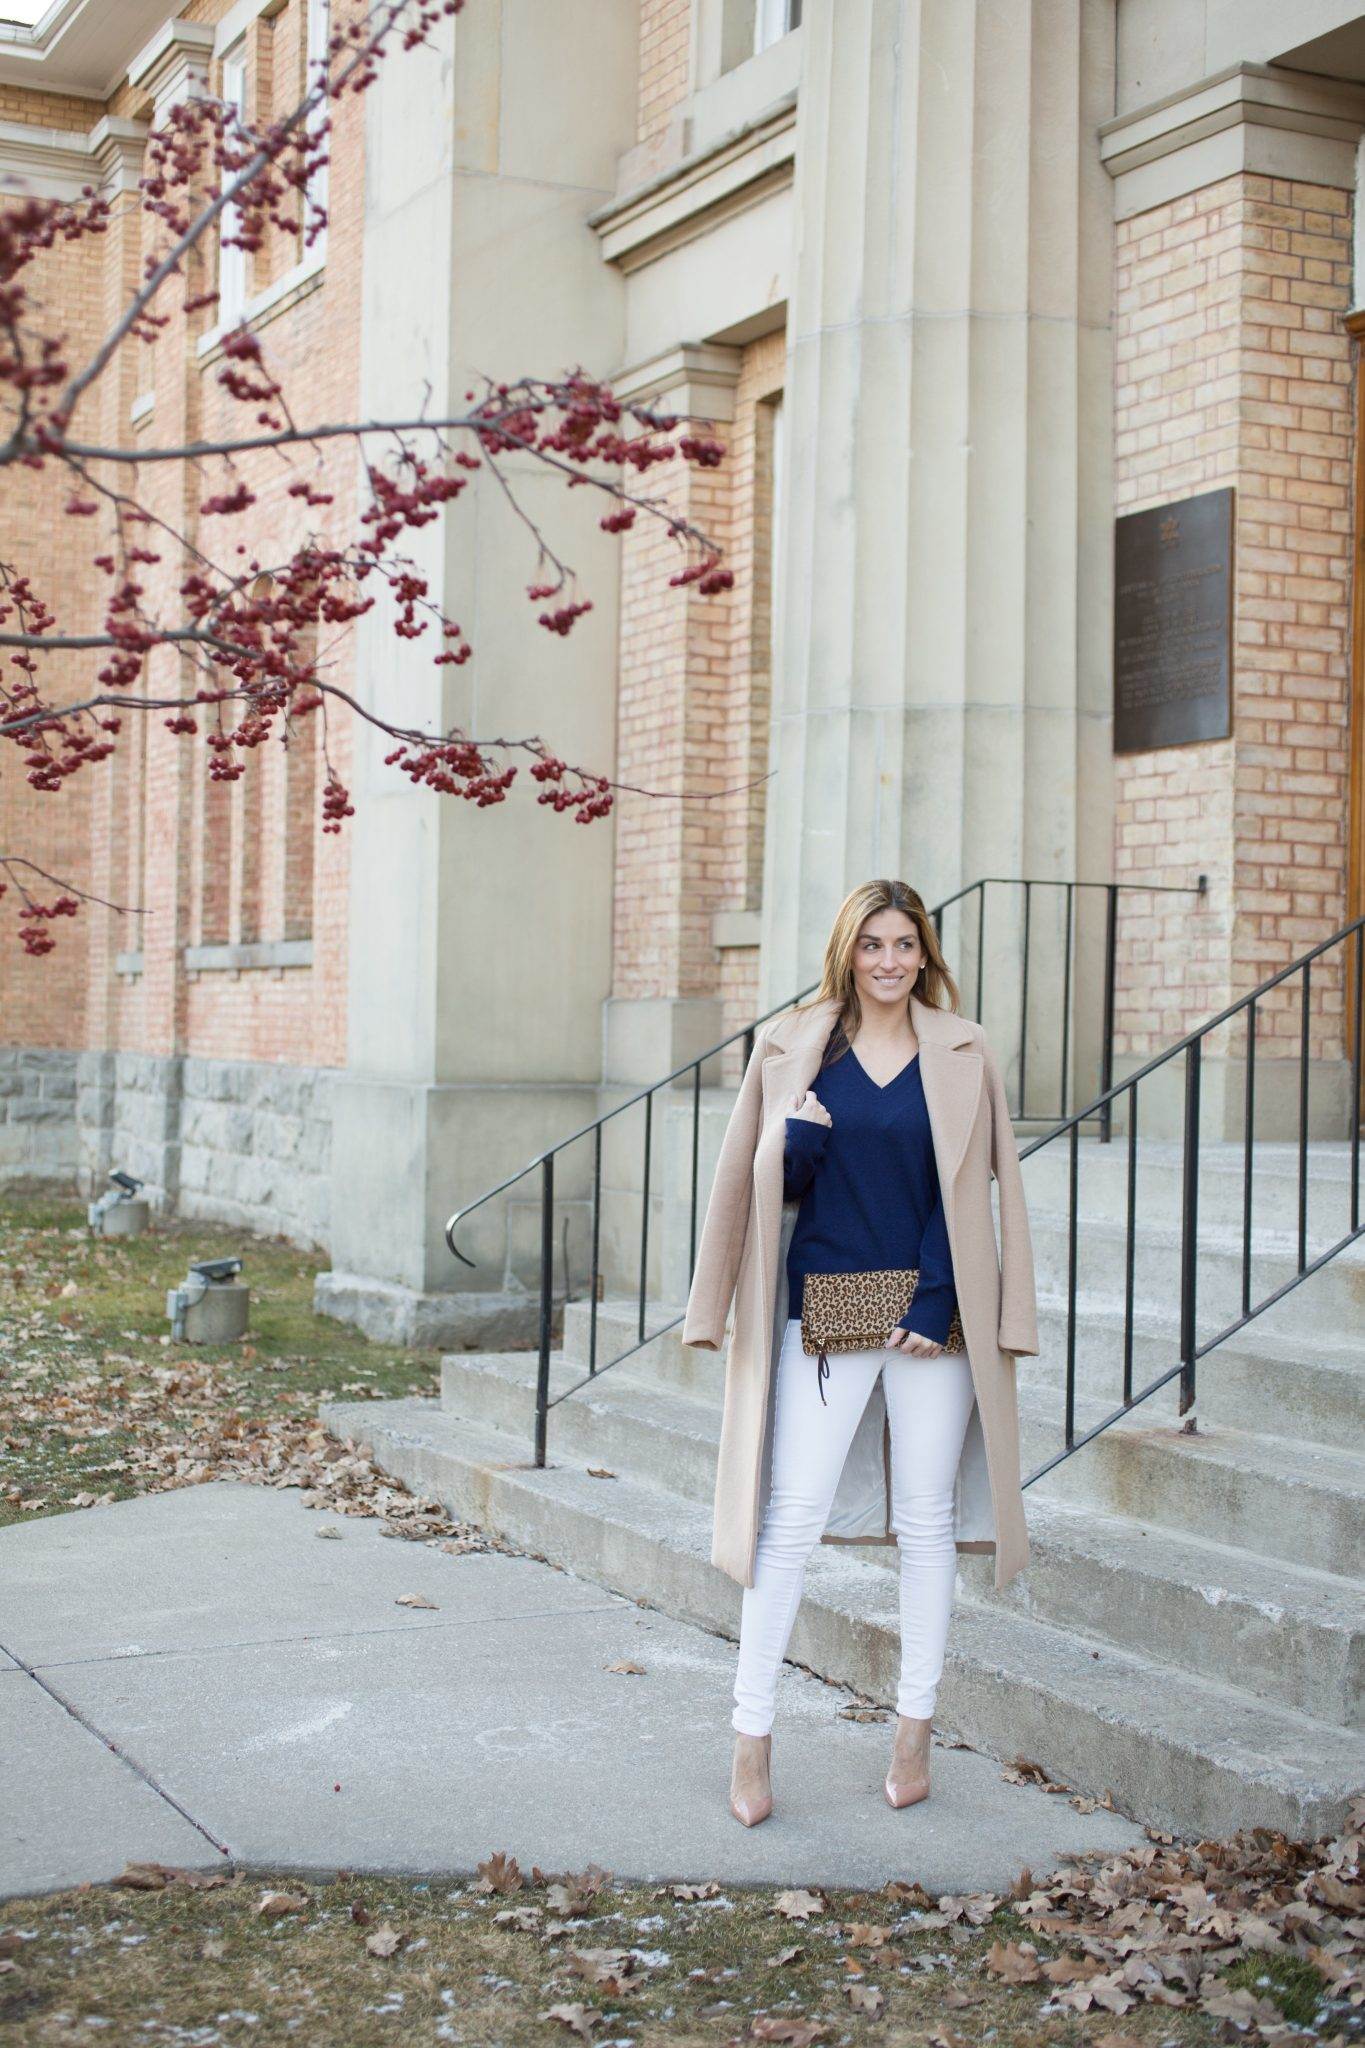 Navy Cashmere sweater from Uniqlo, white skinny jeans, long camel coat, leaopard clutch from Charming Charlie and Nude Christian Louboutin So Kate Pumps